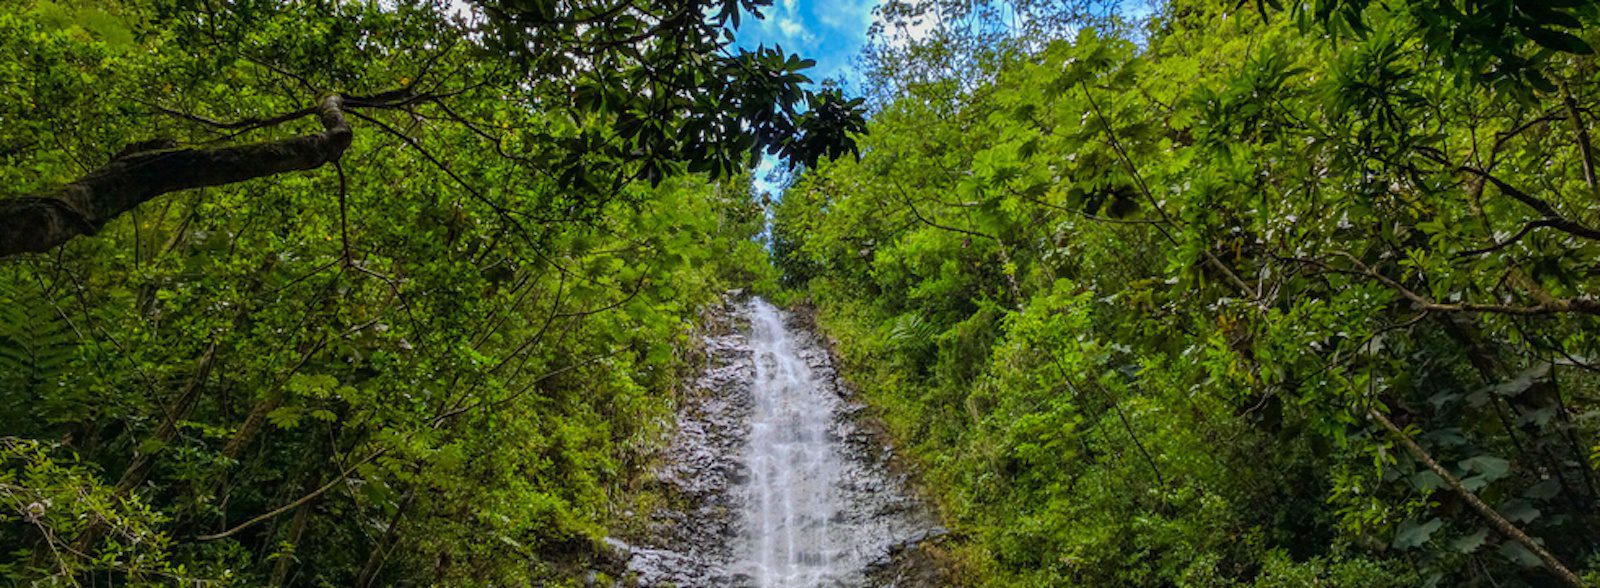 5 of the Best Hikes in Oahu With Waterfalls You Have to Try